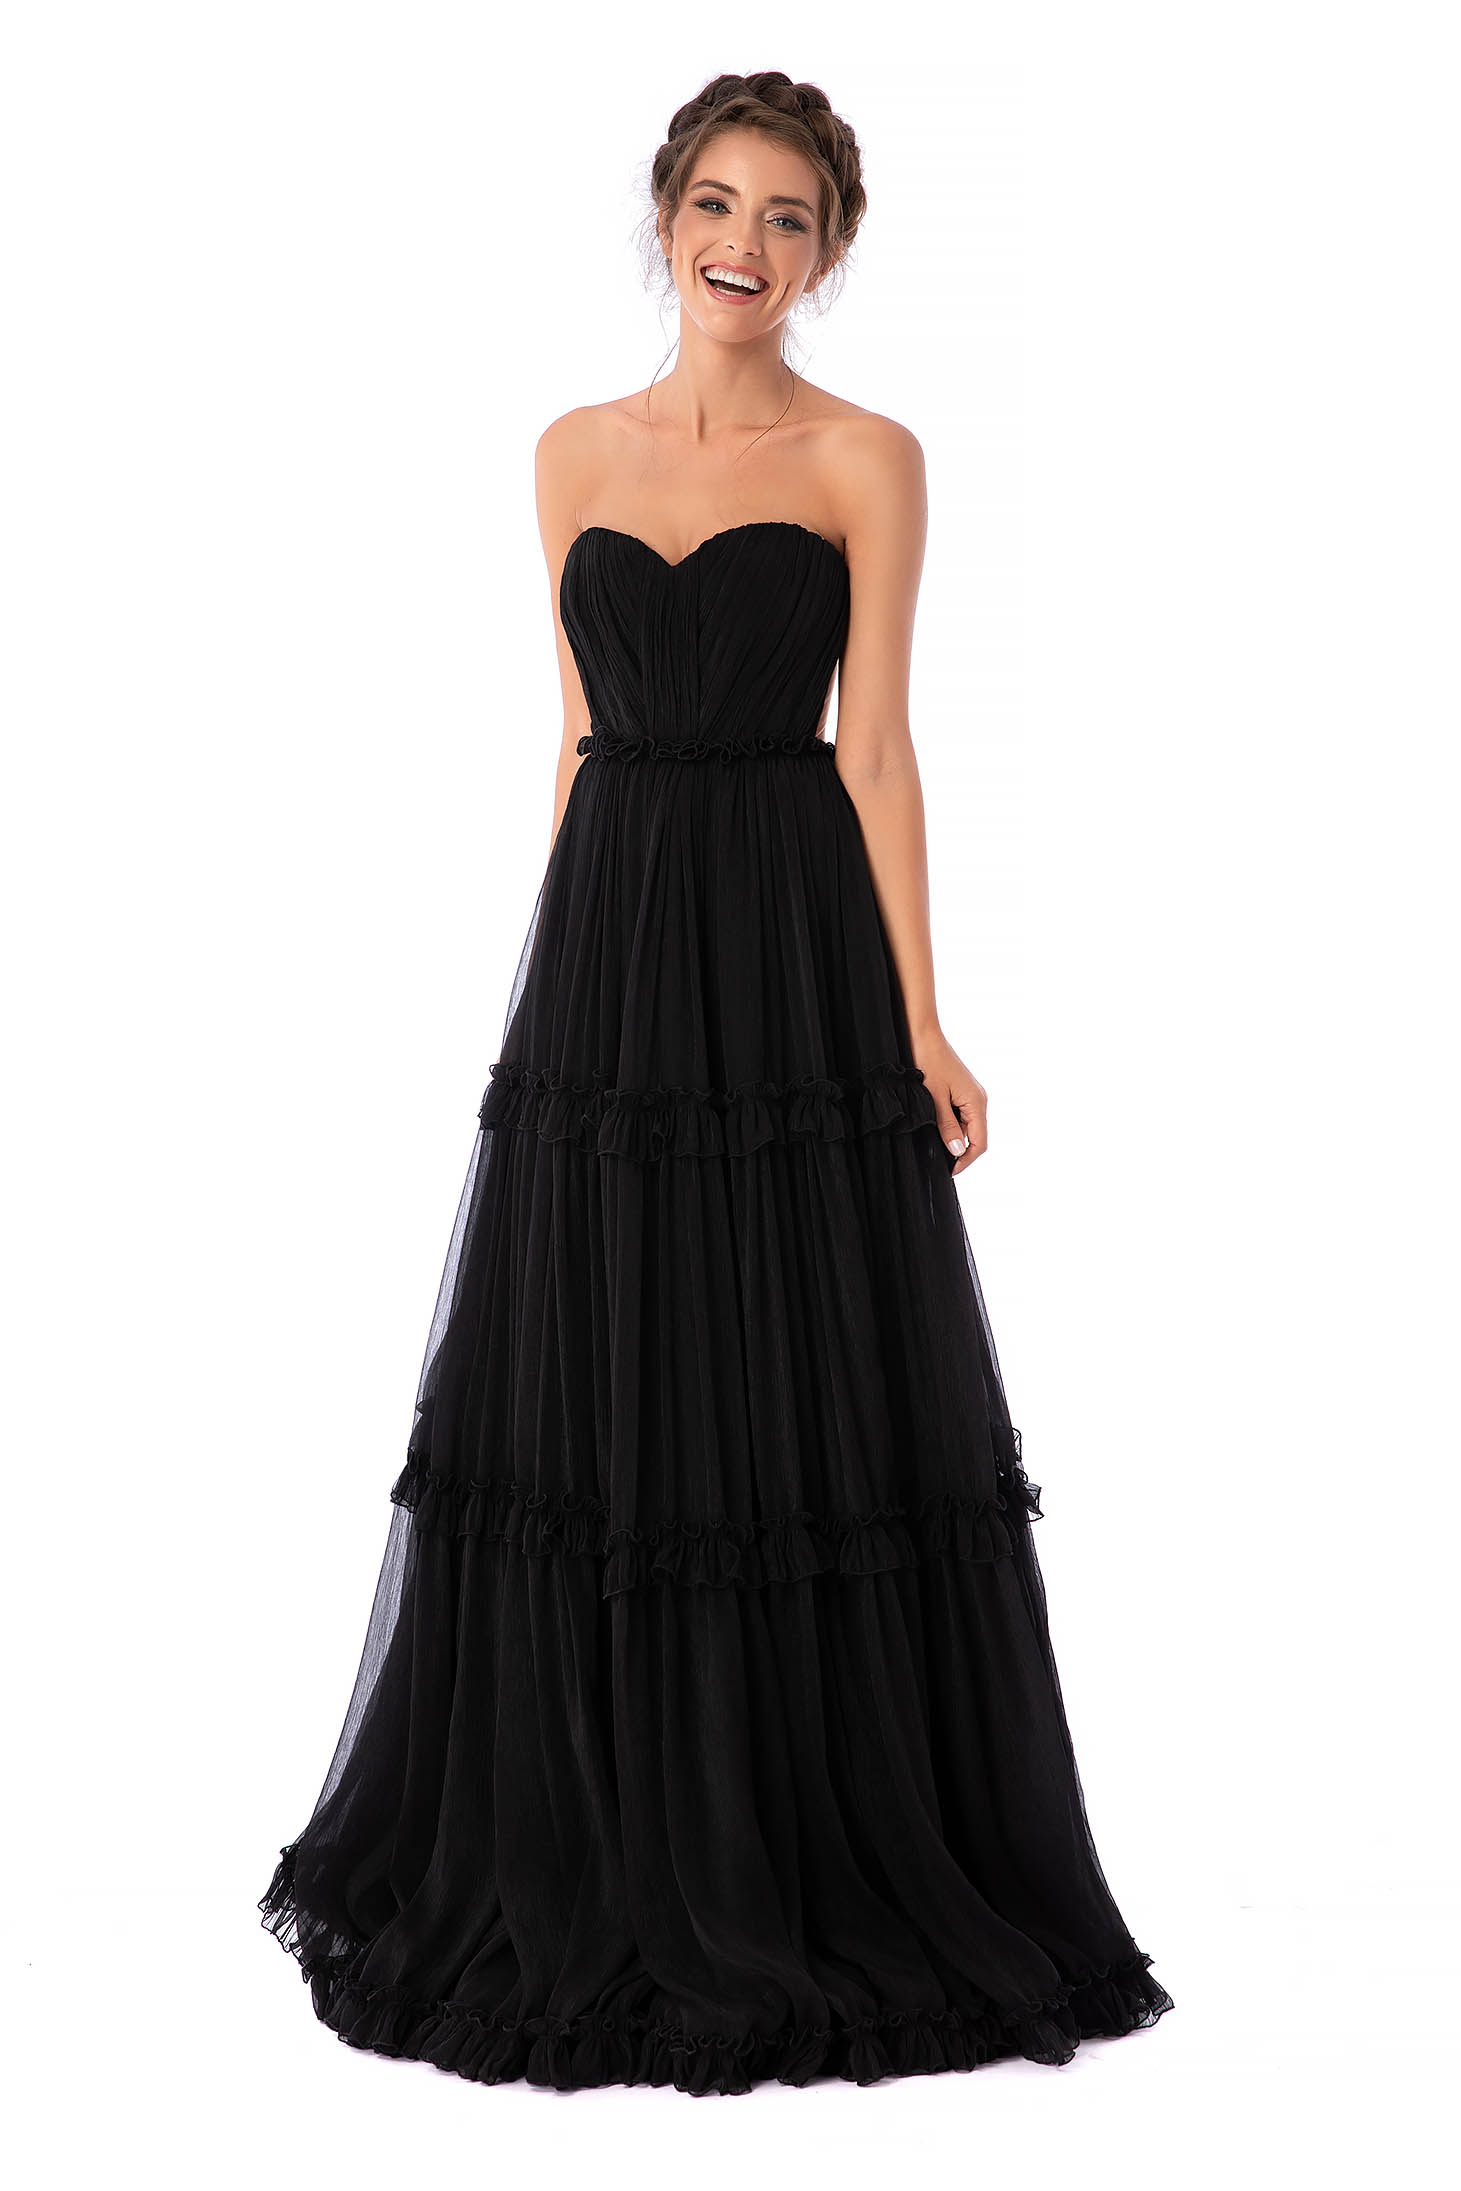 Ana Radu luxurious long cloche corset black dress with ruffle details and naked shoulders